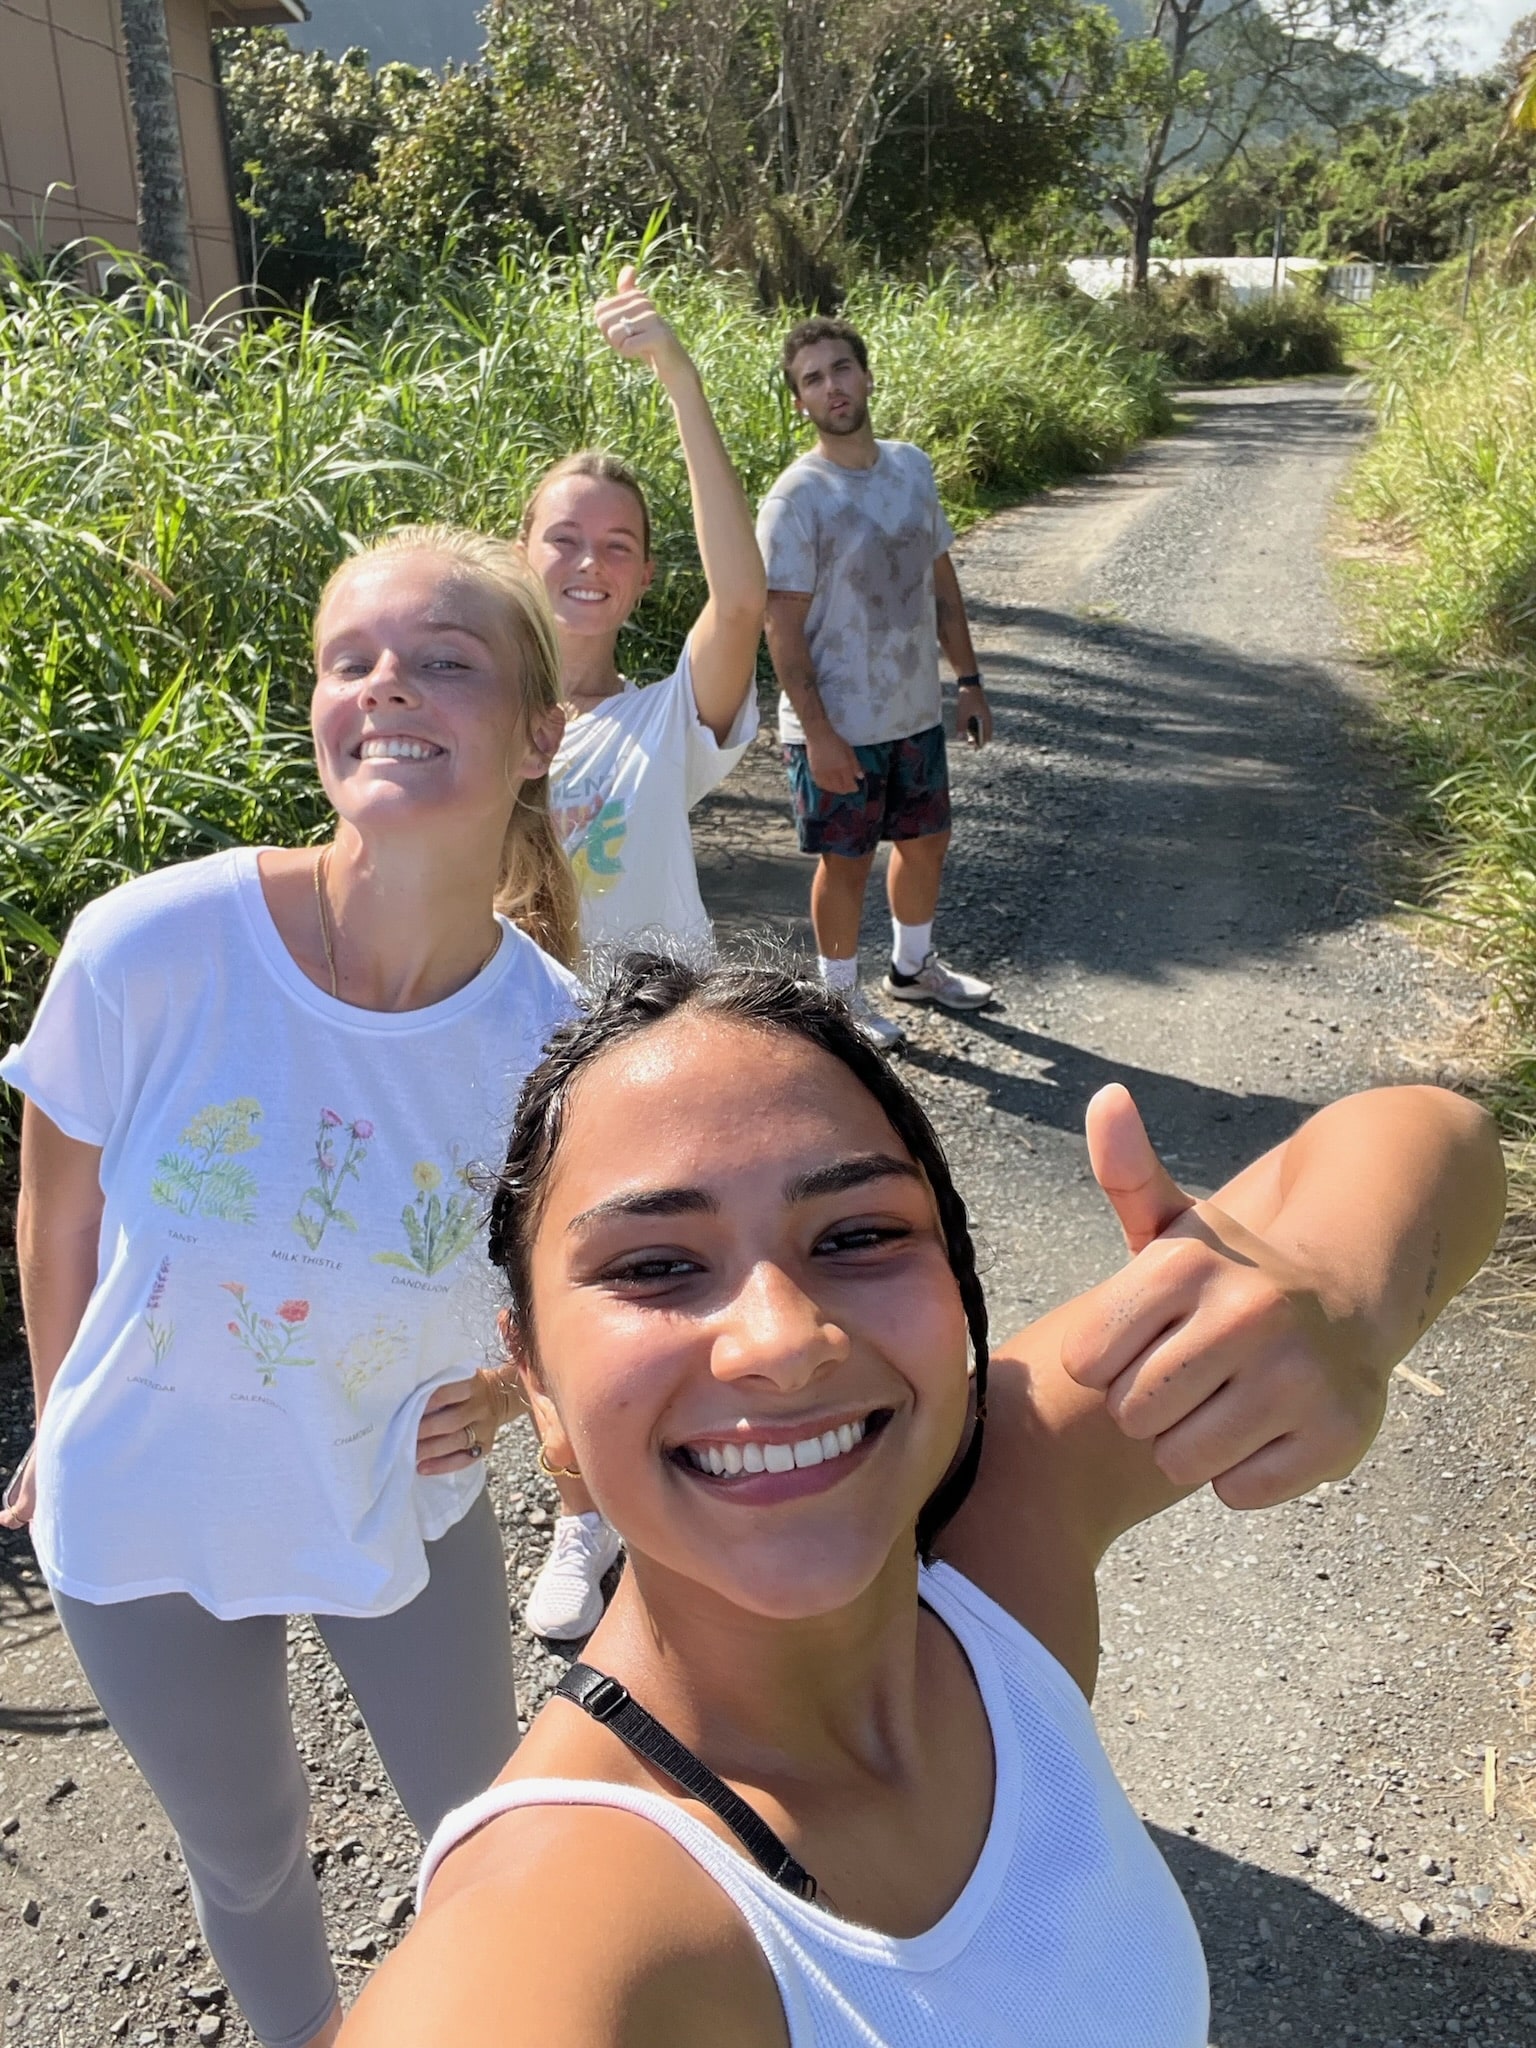 Four friends smiling into the camera giving a thumbs up while on a running trail